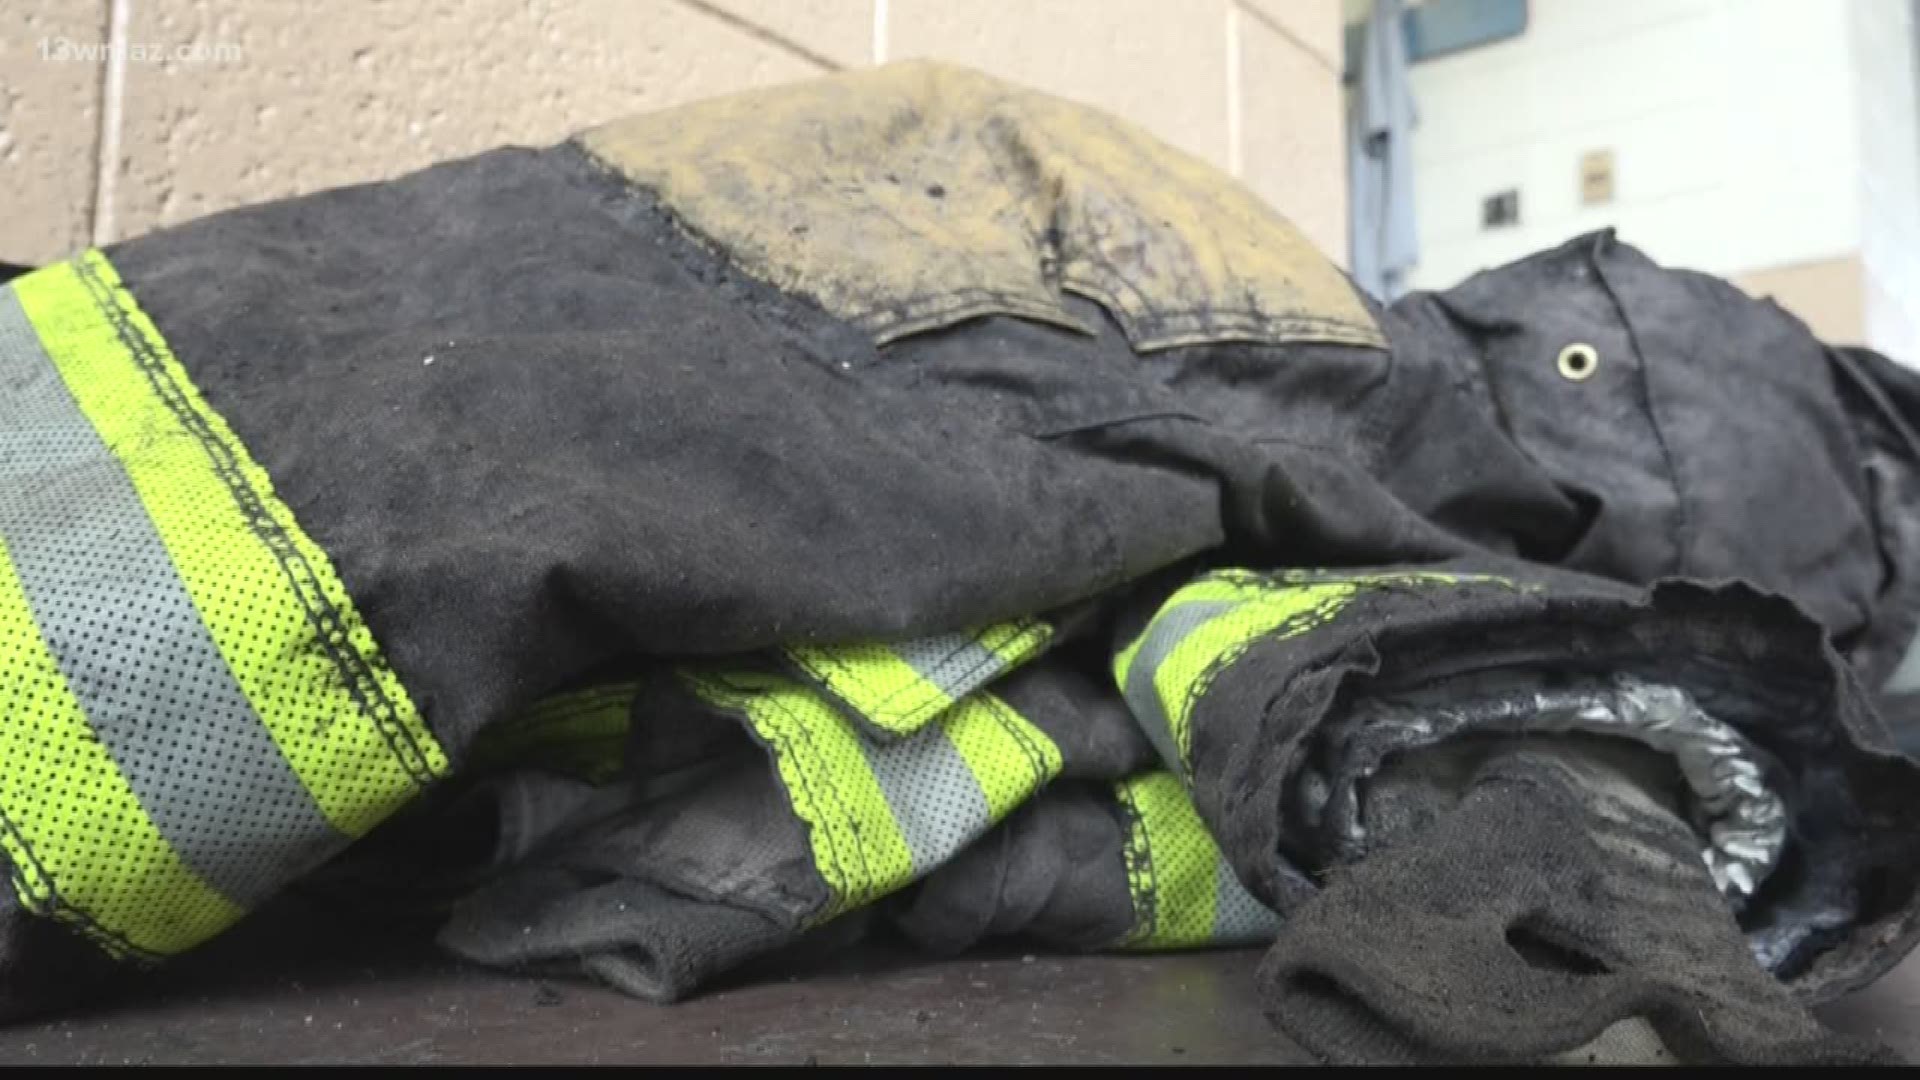 Every day, firefighters rush into burning buildings without knowing what they'll find. Wednesday night, 5 of those Bibb County firefighters ended up in the hospital.